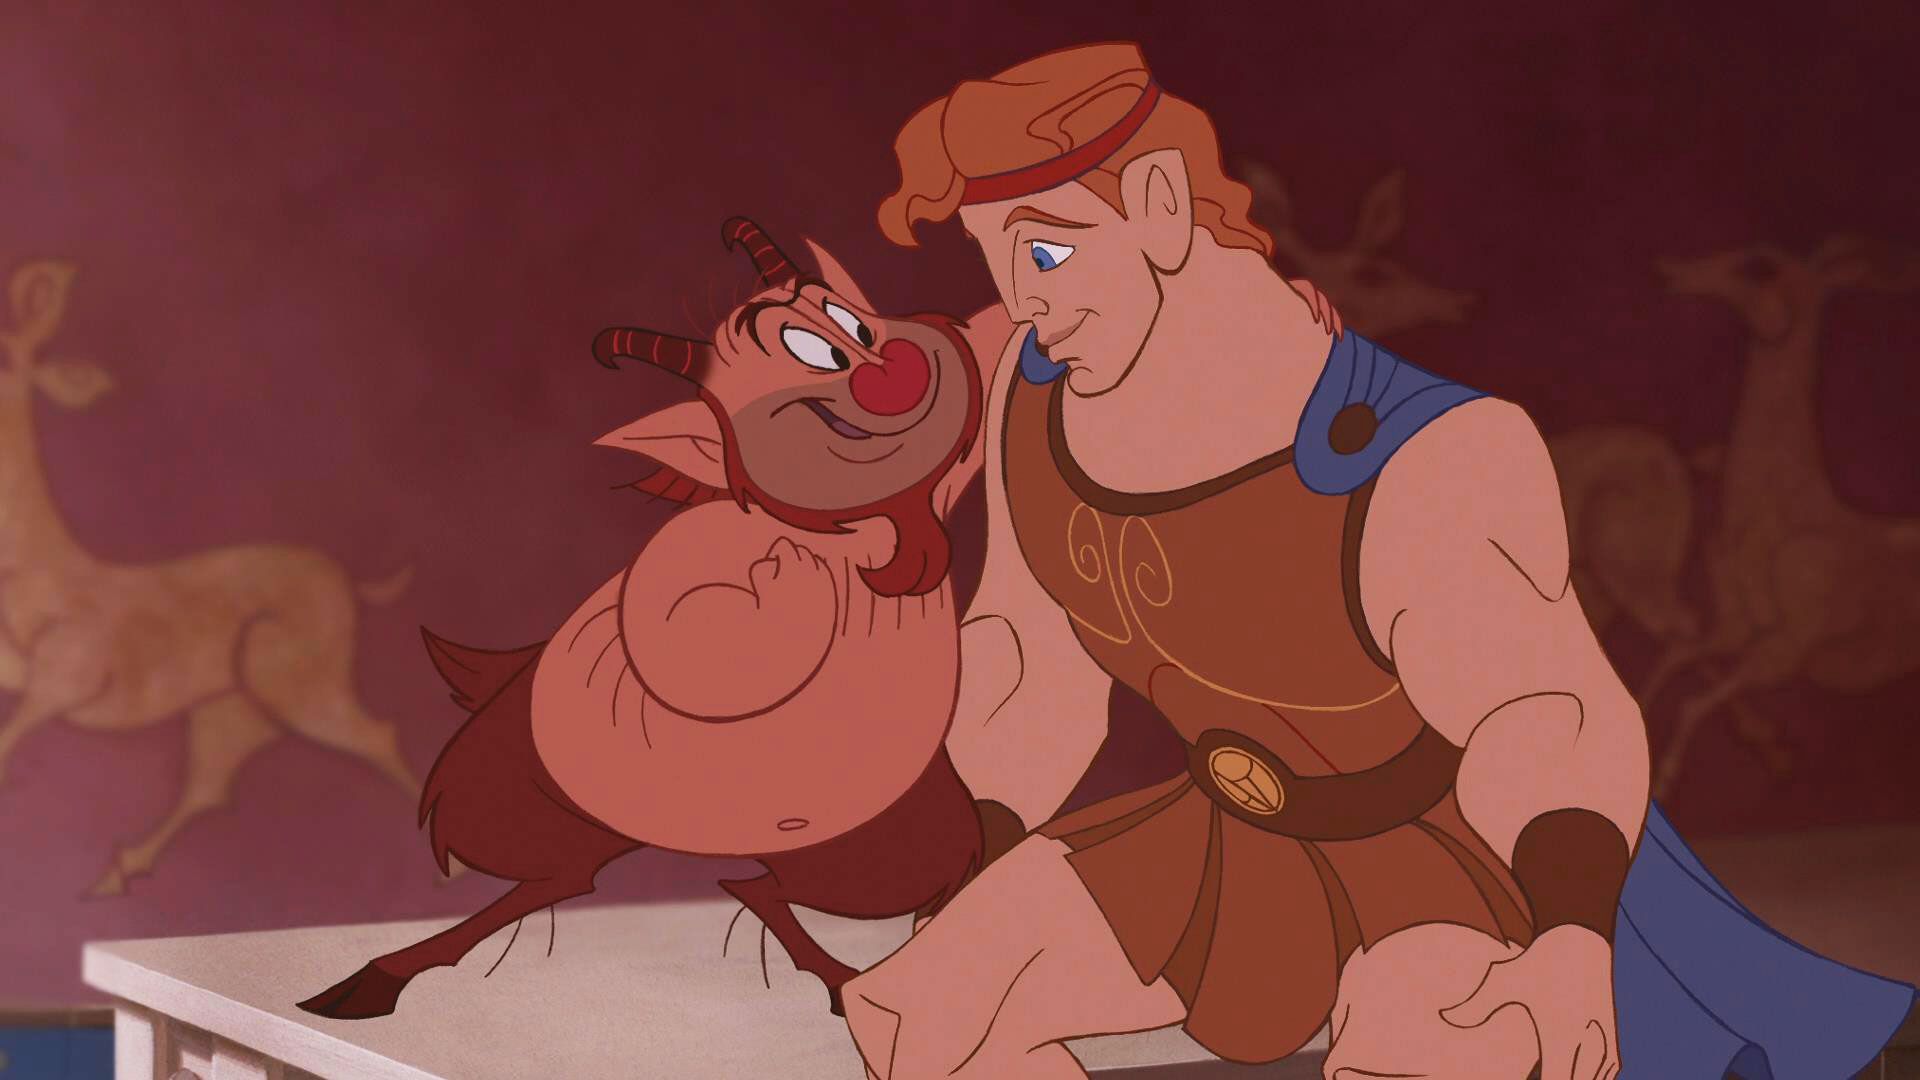 Disney's 'Hercules' Is Getting the Live-Action Treatment